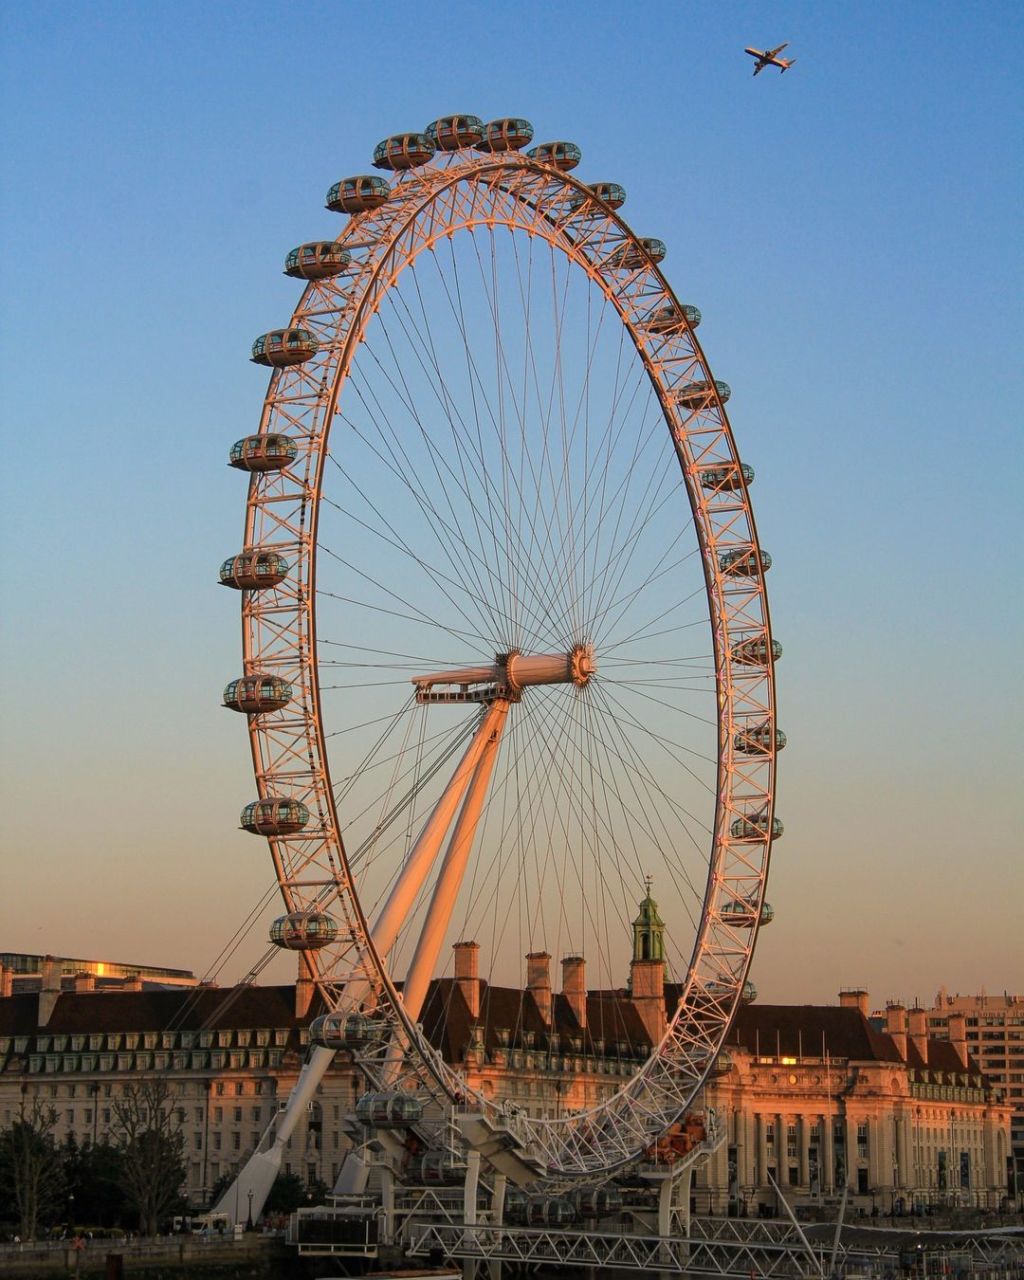 London Eye: Eye-Popping Views and Whimsical Whirlwinds